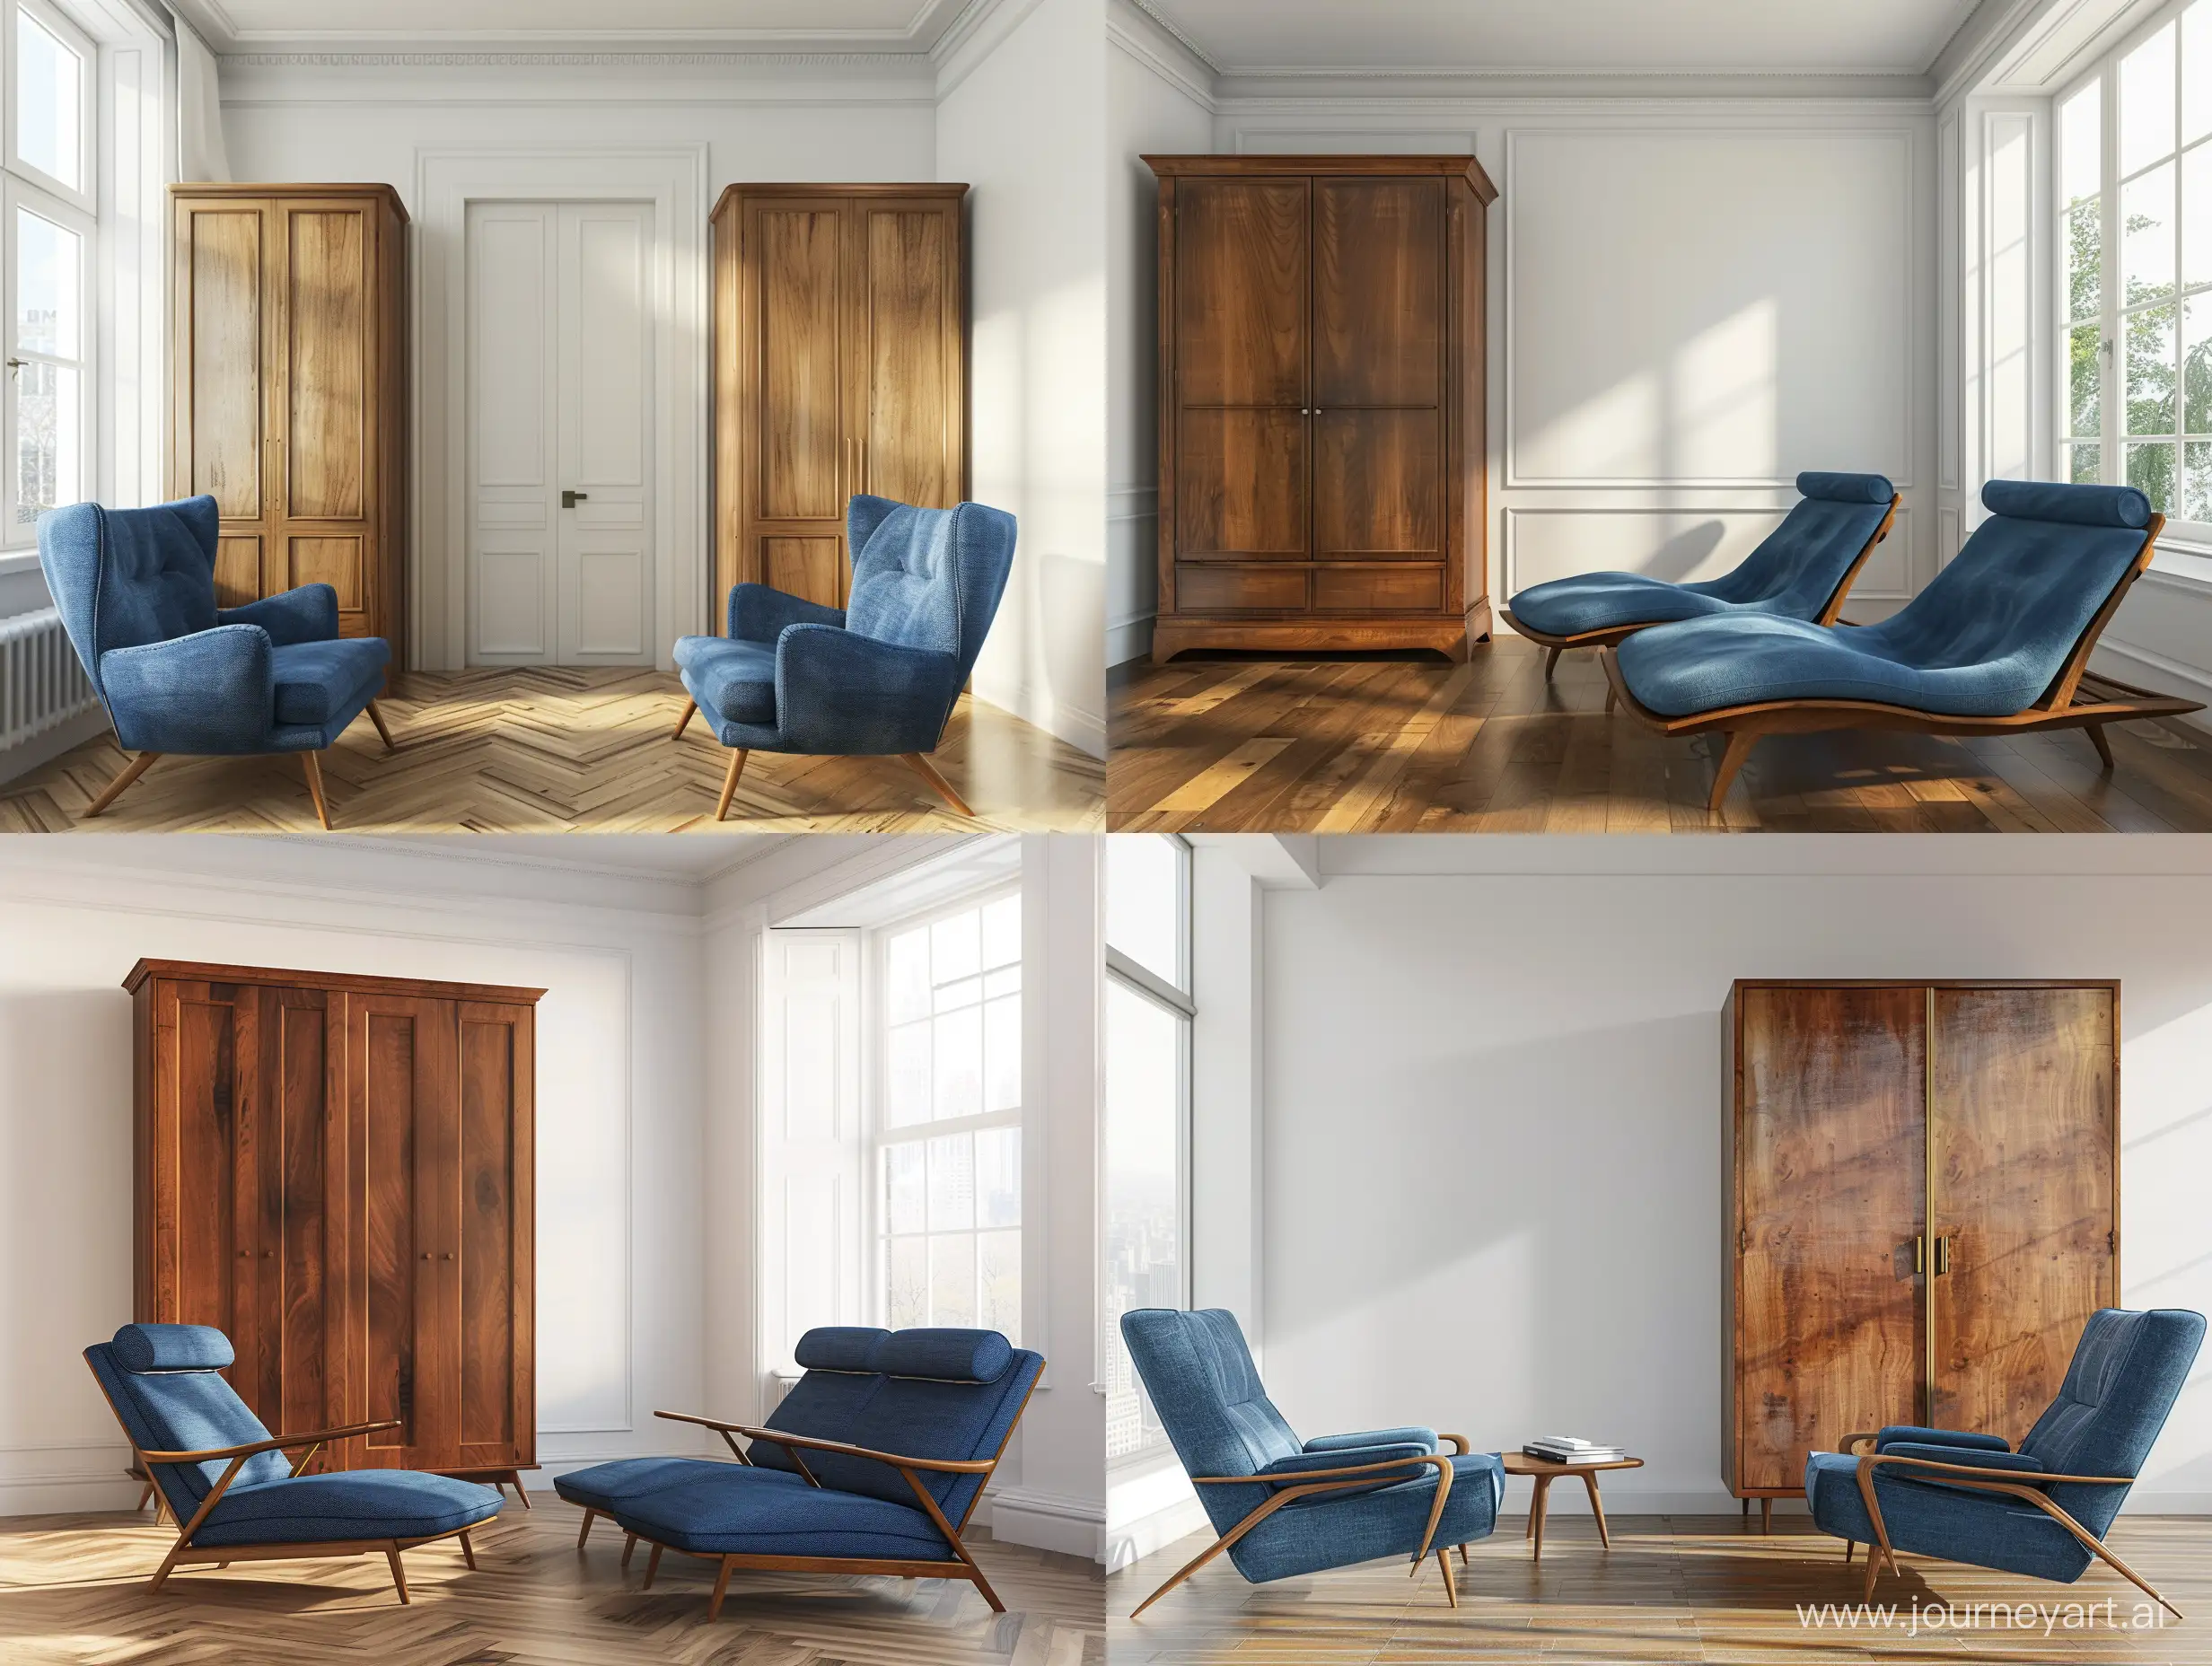 Mid-Century-Modern-Vintage-Living-Room-Interior-with-Blue-Lounge-Chairs-and-Wooden-Wardrobe